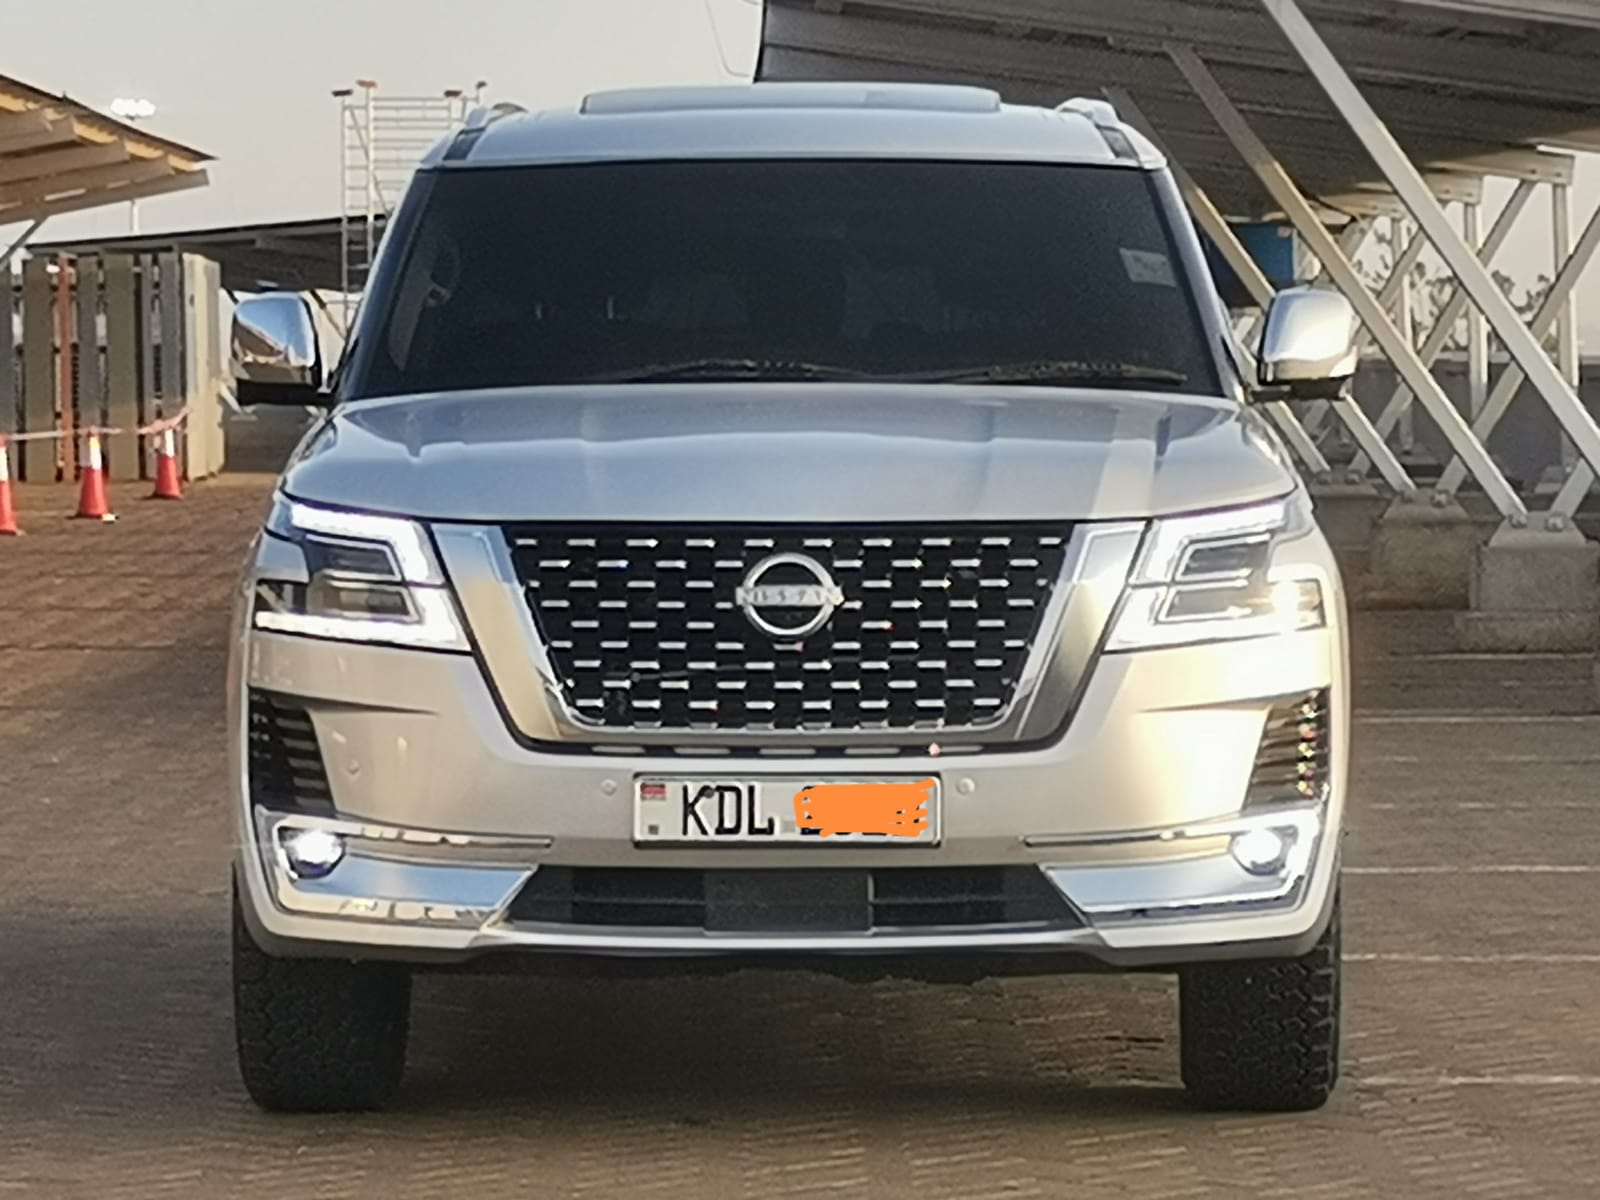 Nissan Patrol 2017 V8 SUNROOF QUICK SALE Trade in OK EXCLUSIVE